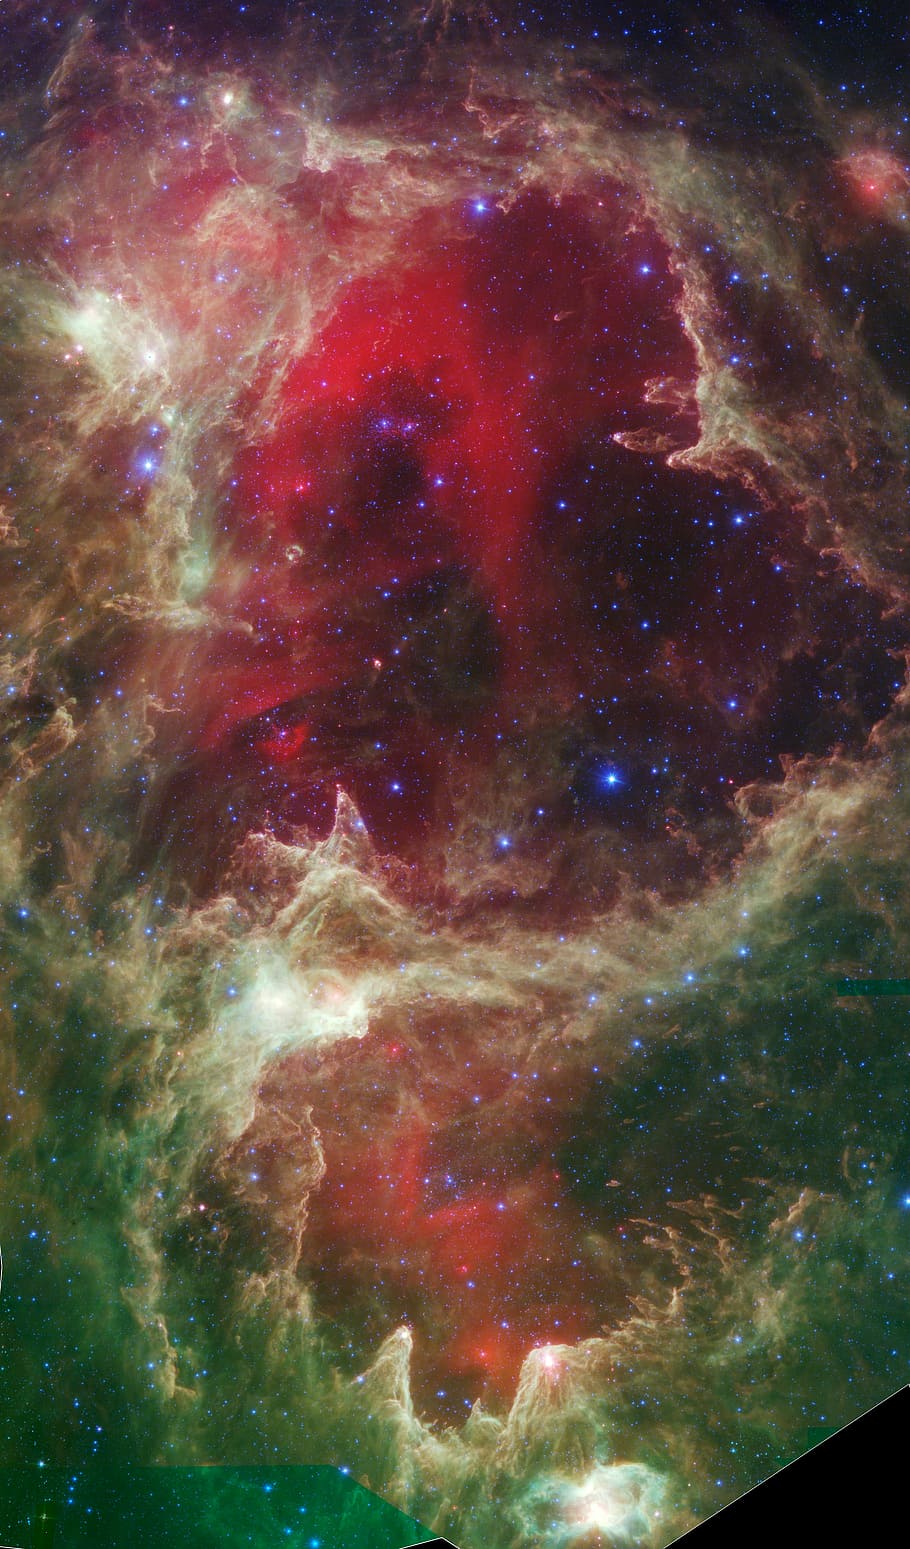 Star Forming Region Of Space, W5, infrared portrait, nasa, spitzer space telescope